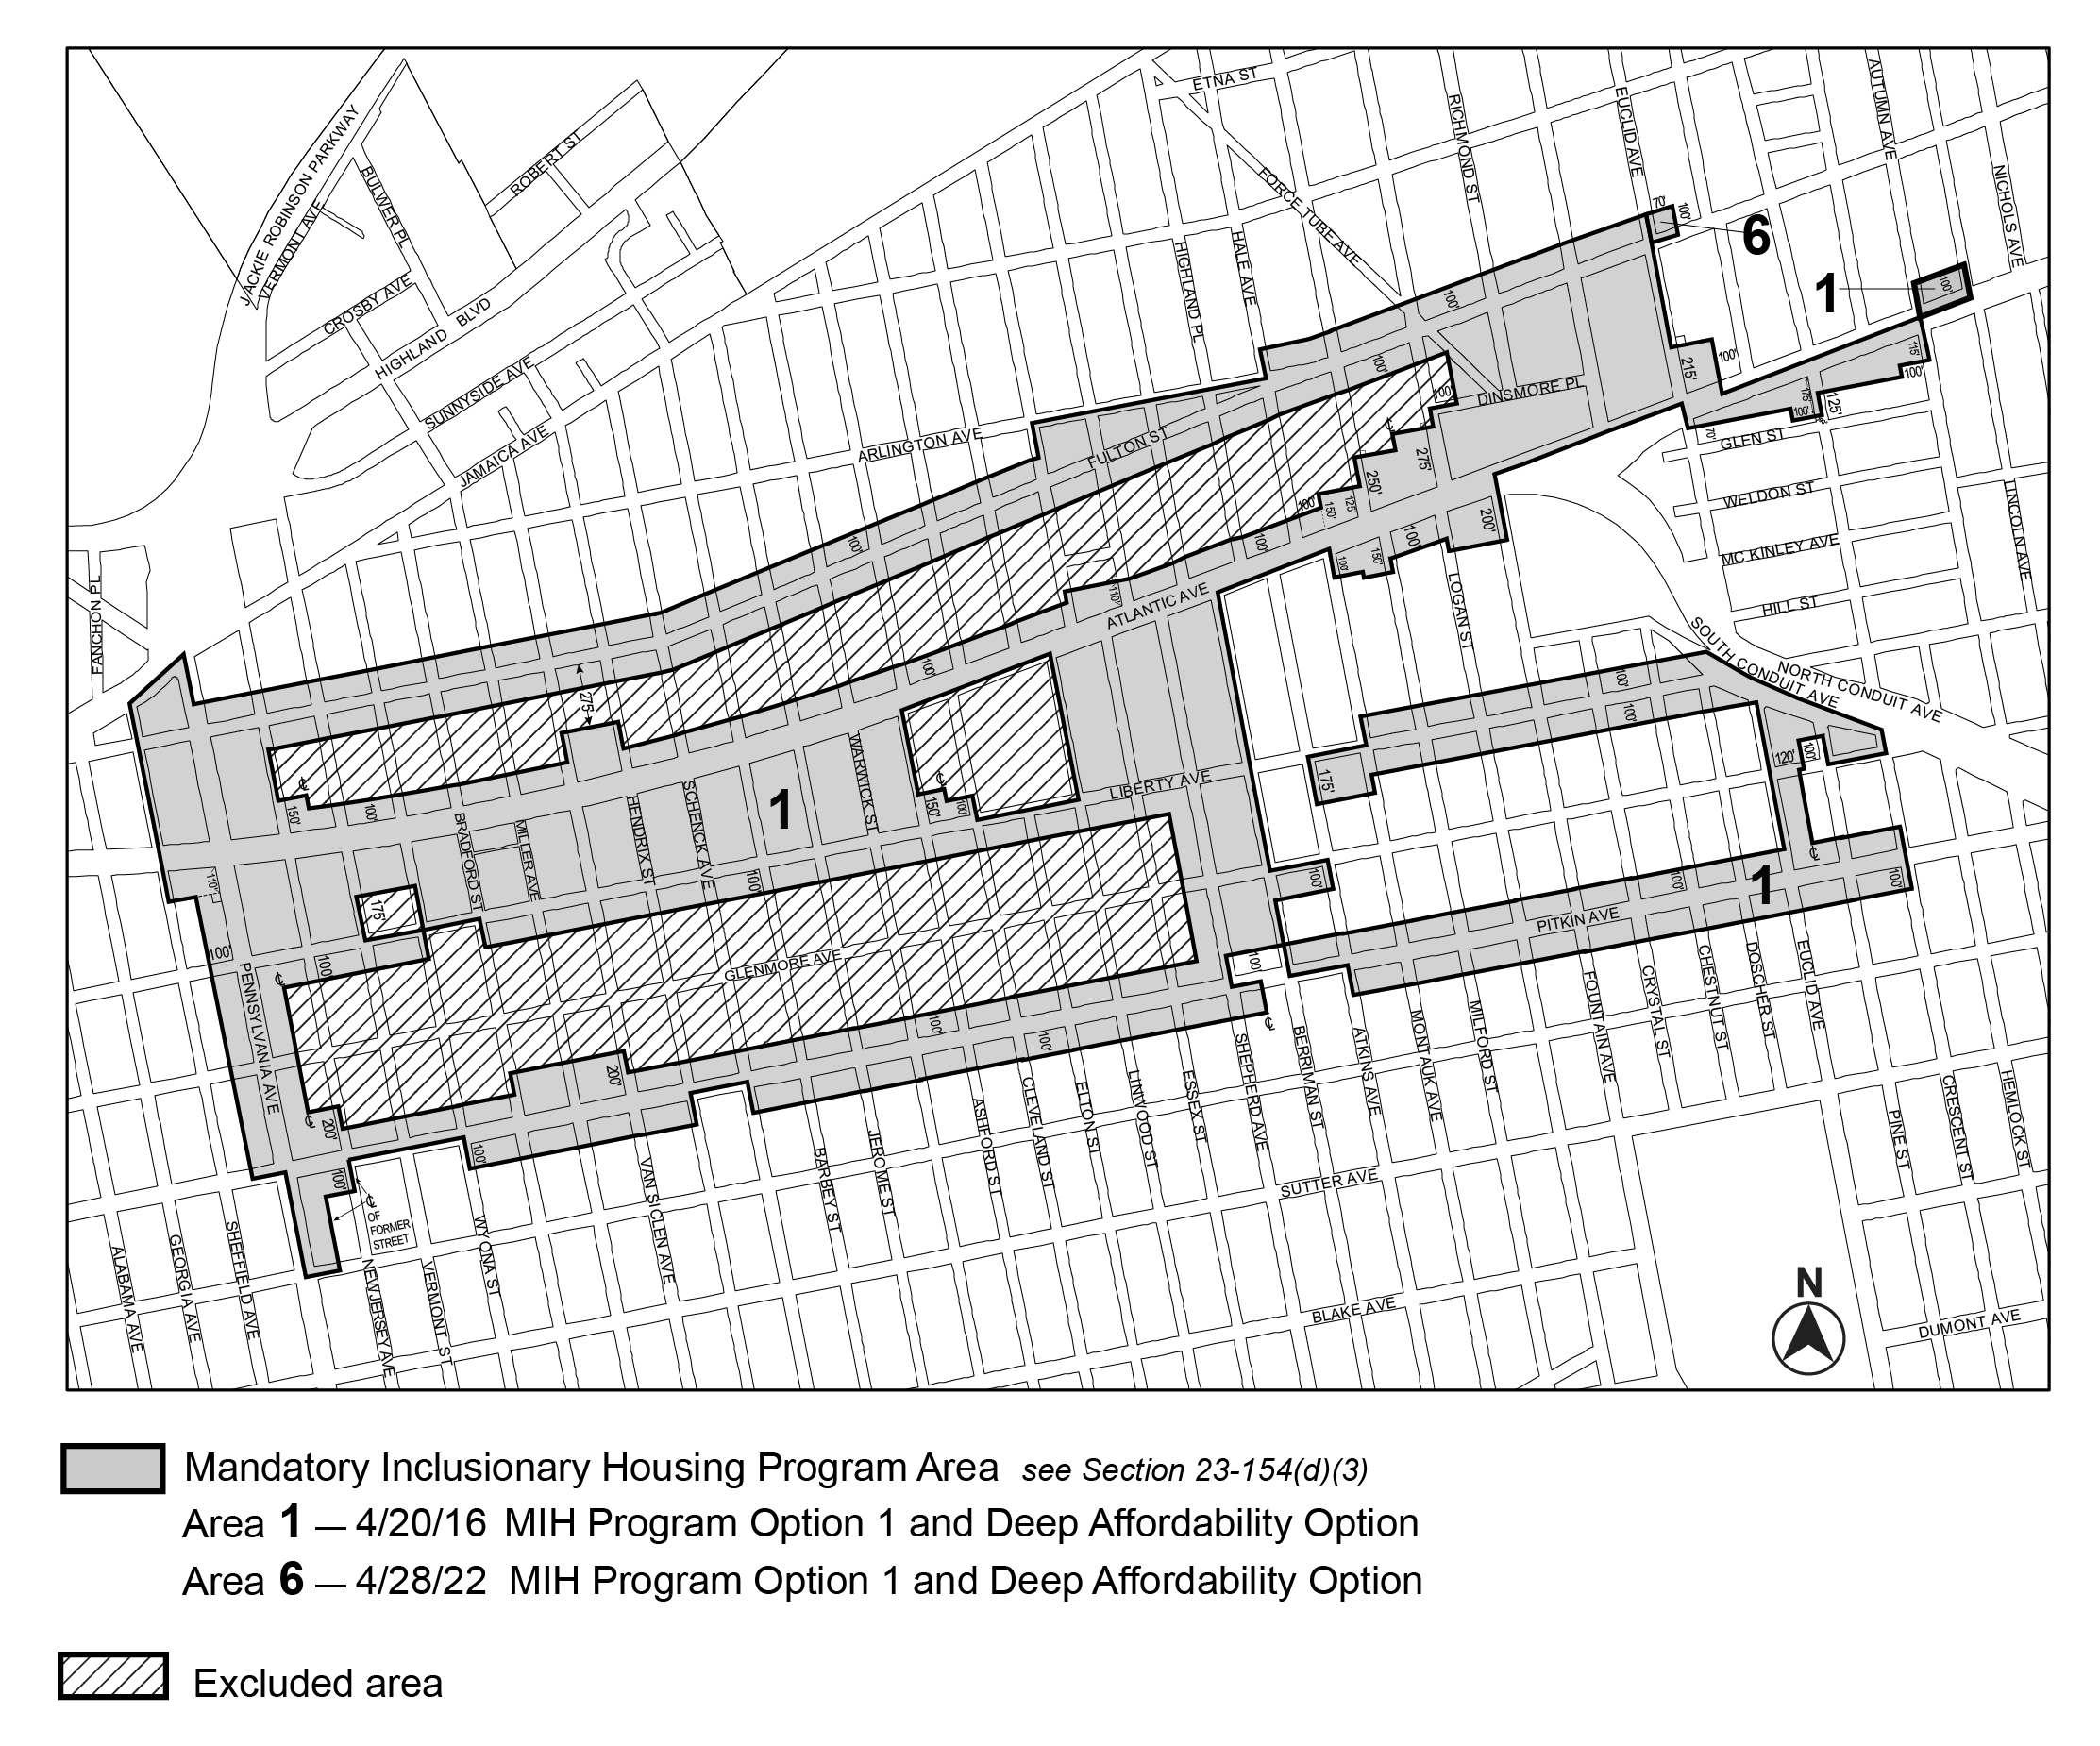 APPENDIX F, Brooklyn CD 5, Map 1, MIH areas 1 and 6 (both: Option 1 and Deep Affordability Option)